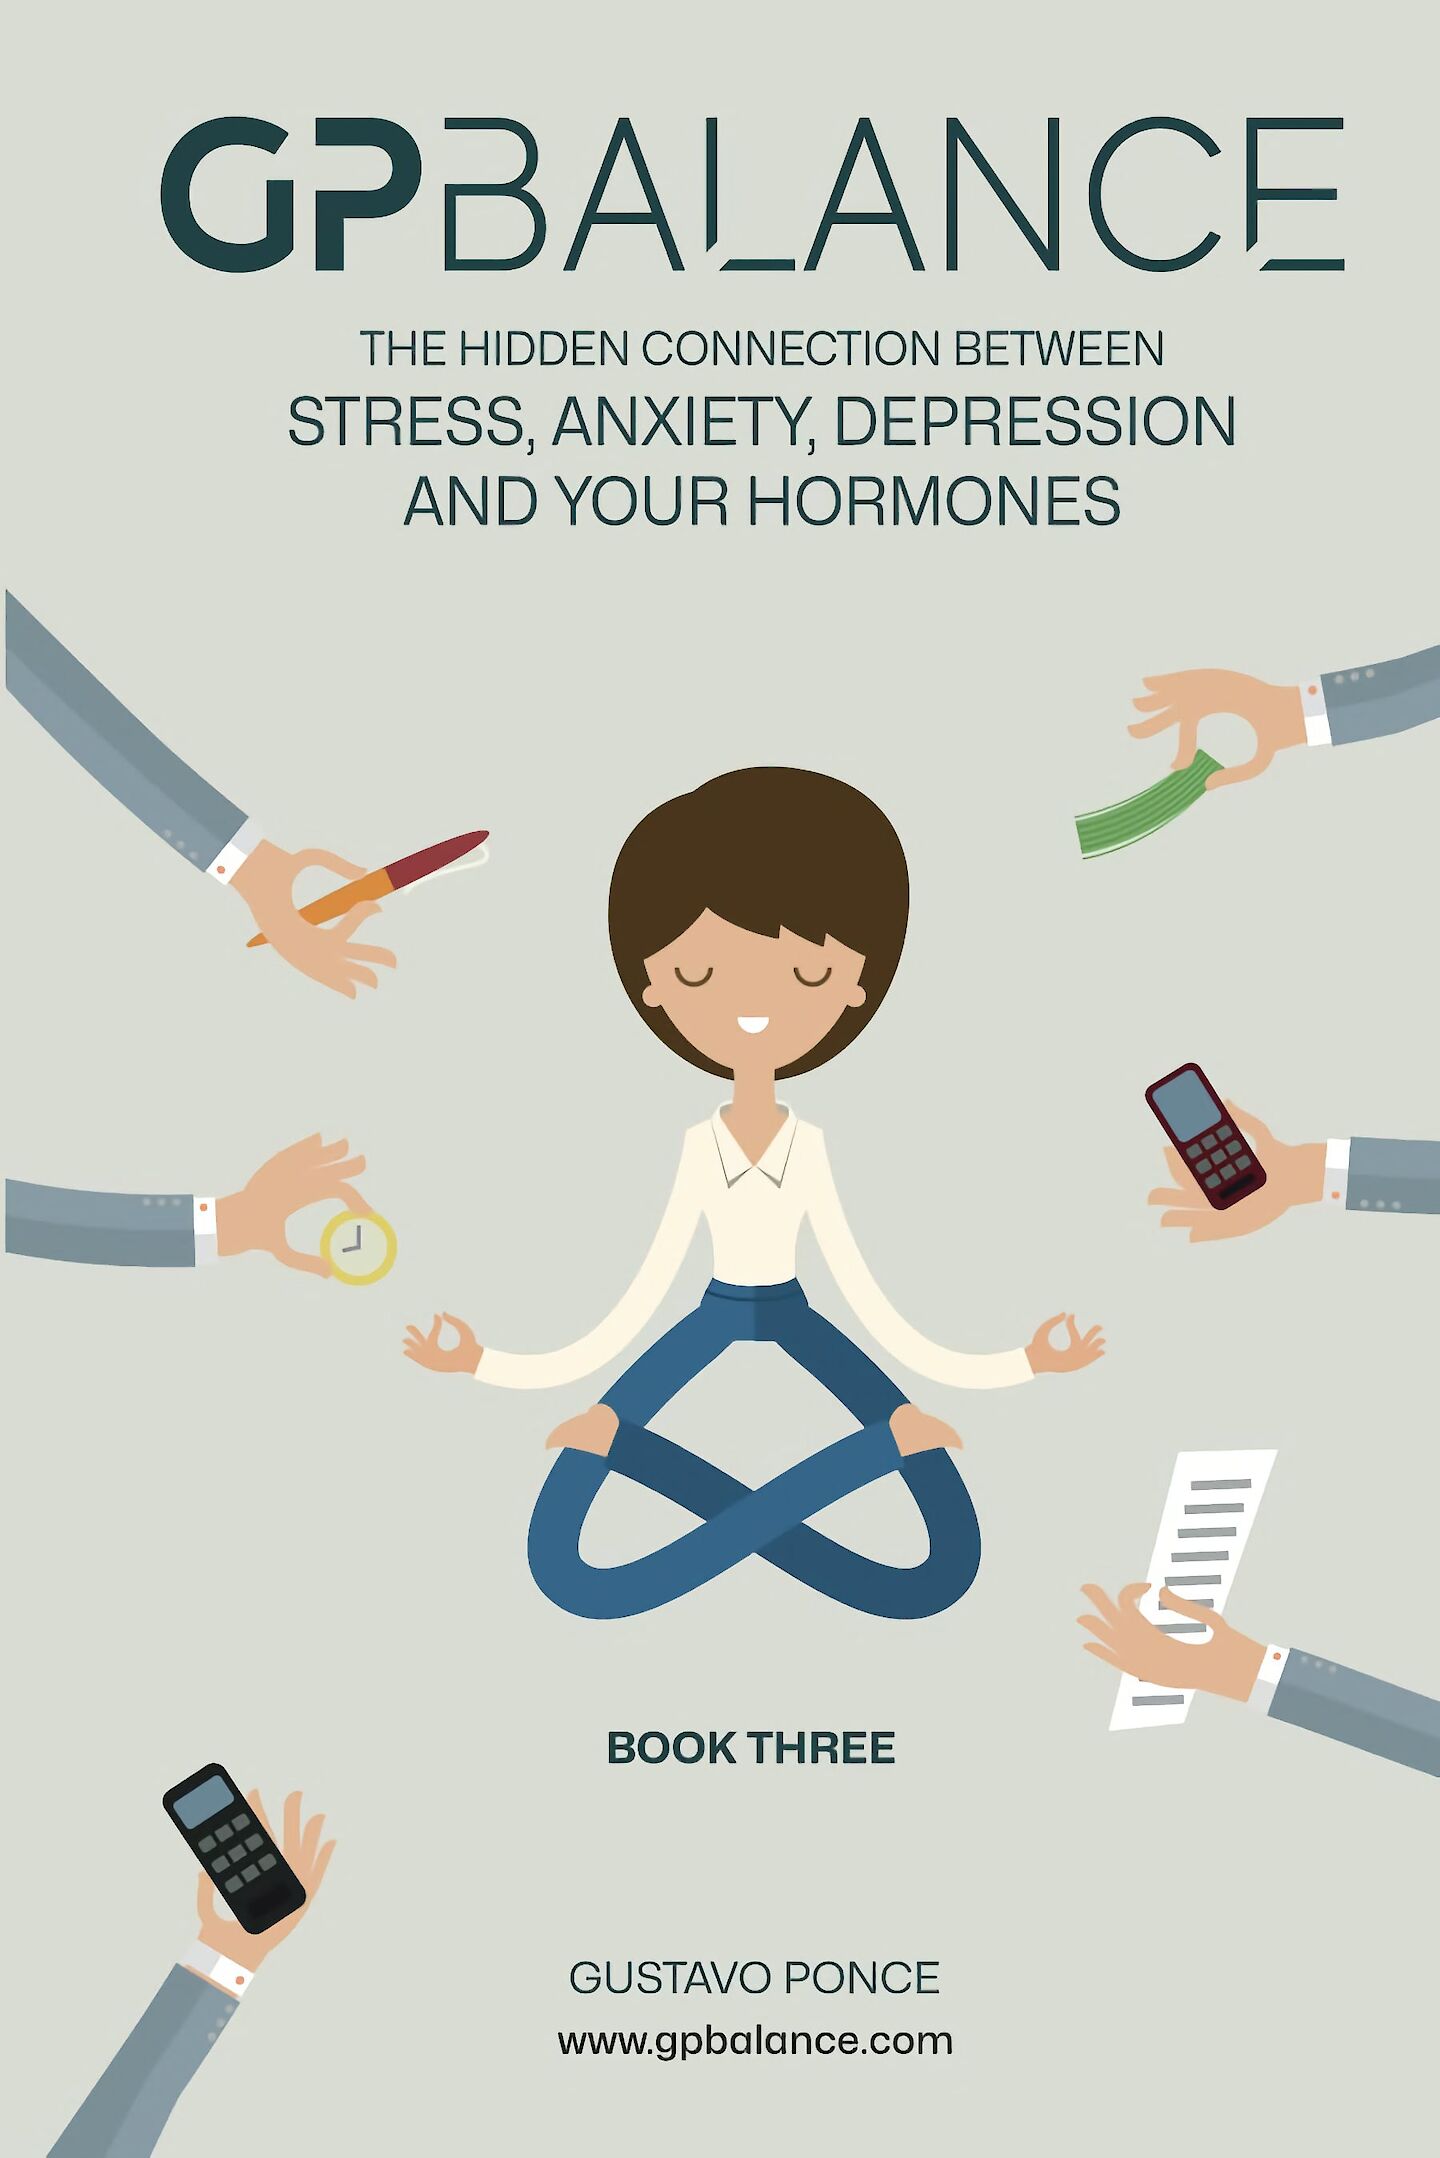 GPBALANCE. The Hidden Connection between Stress, Anxiety, Depression and your Hormones